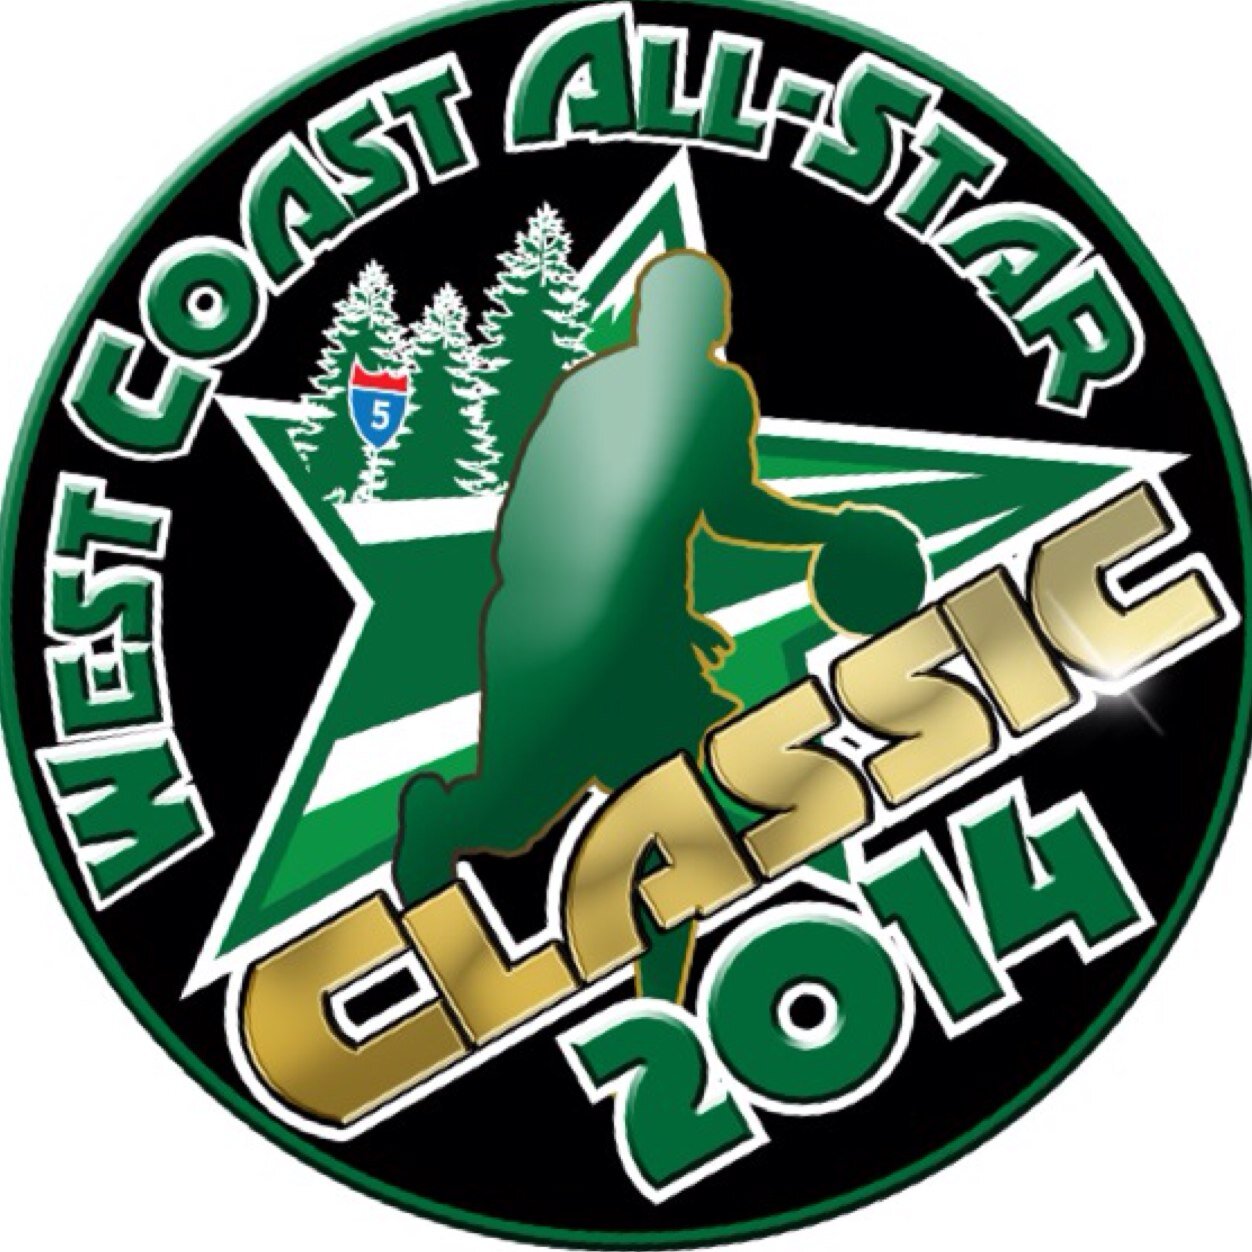 WCAC or #WestCoastAllStarClassic is a High School basketball all star game featuring the of the top college bound preps in the country. Check out our site!